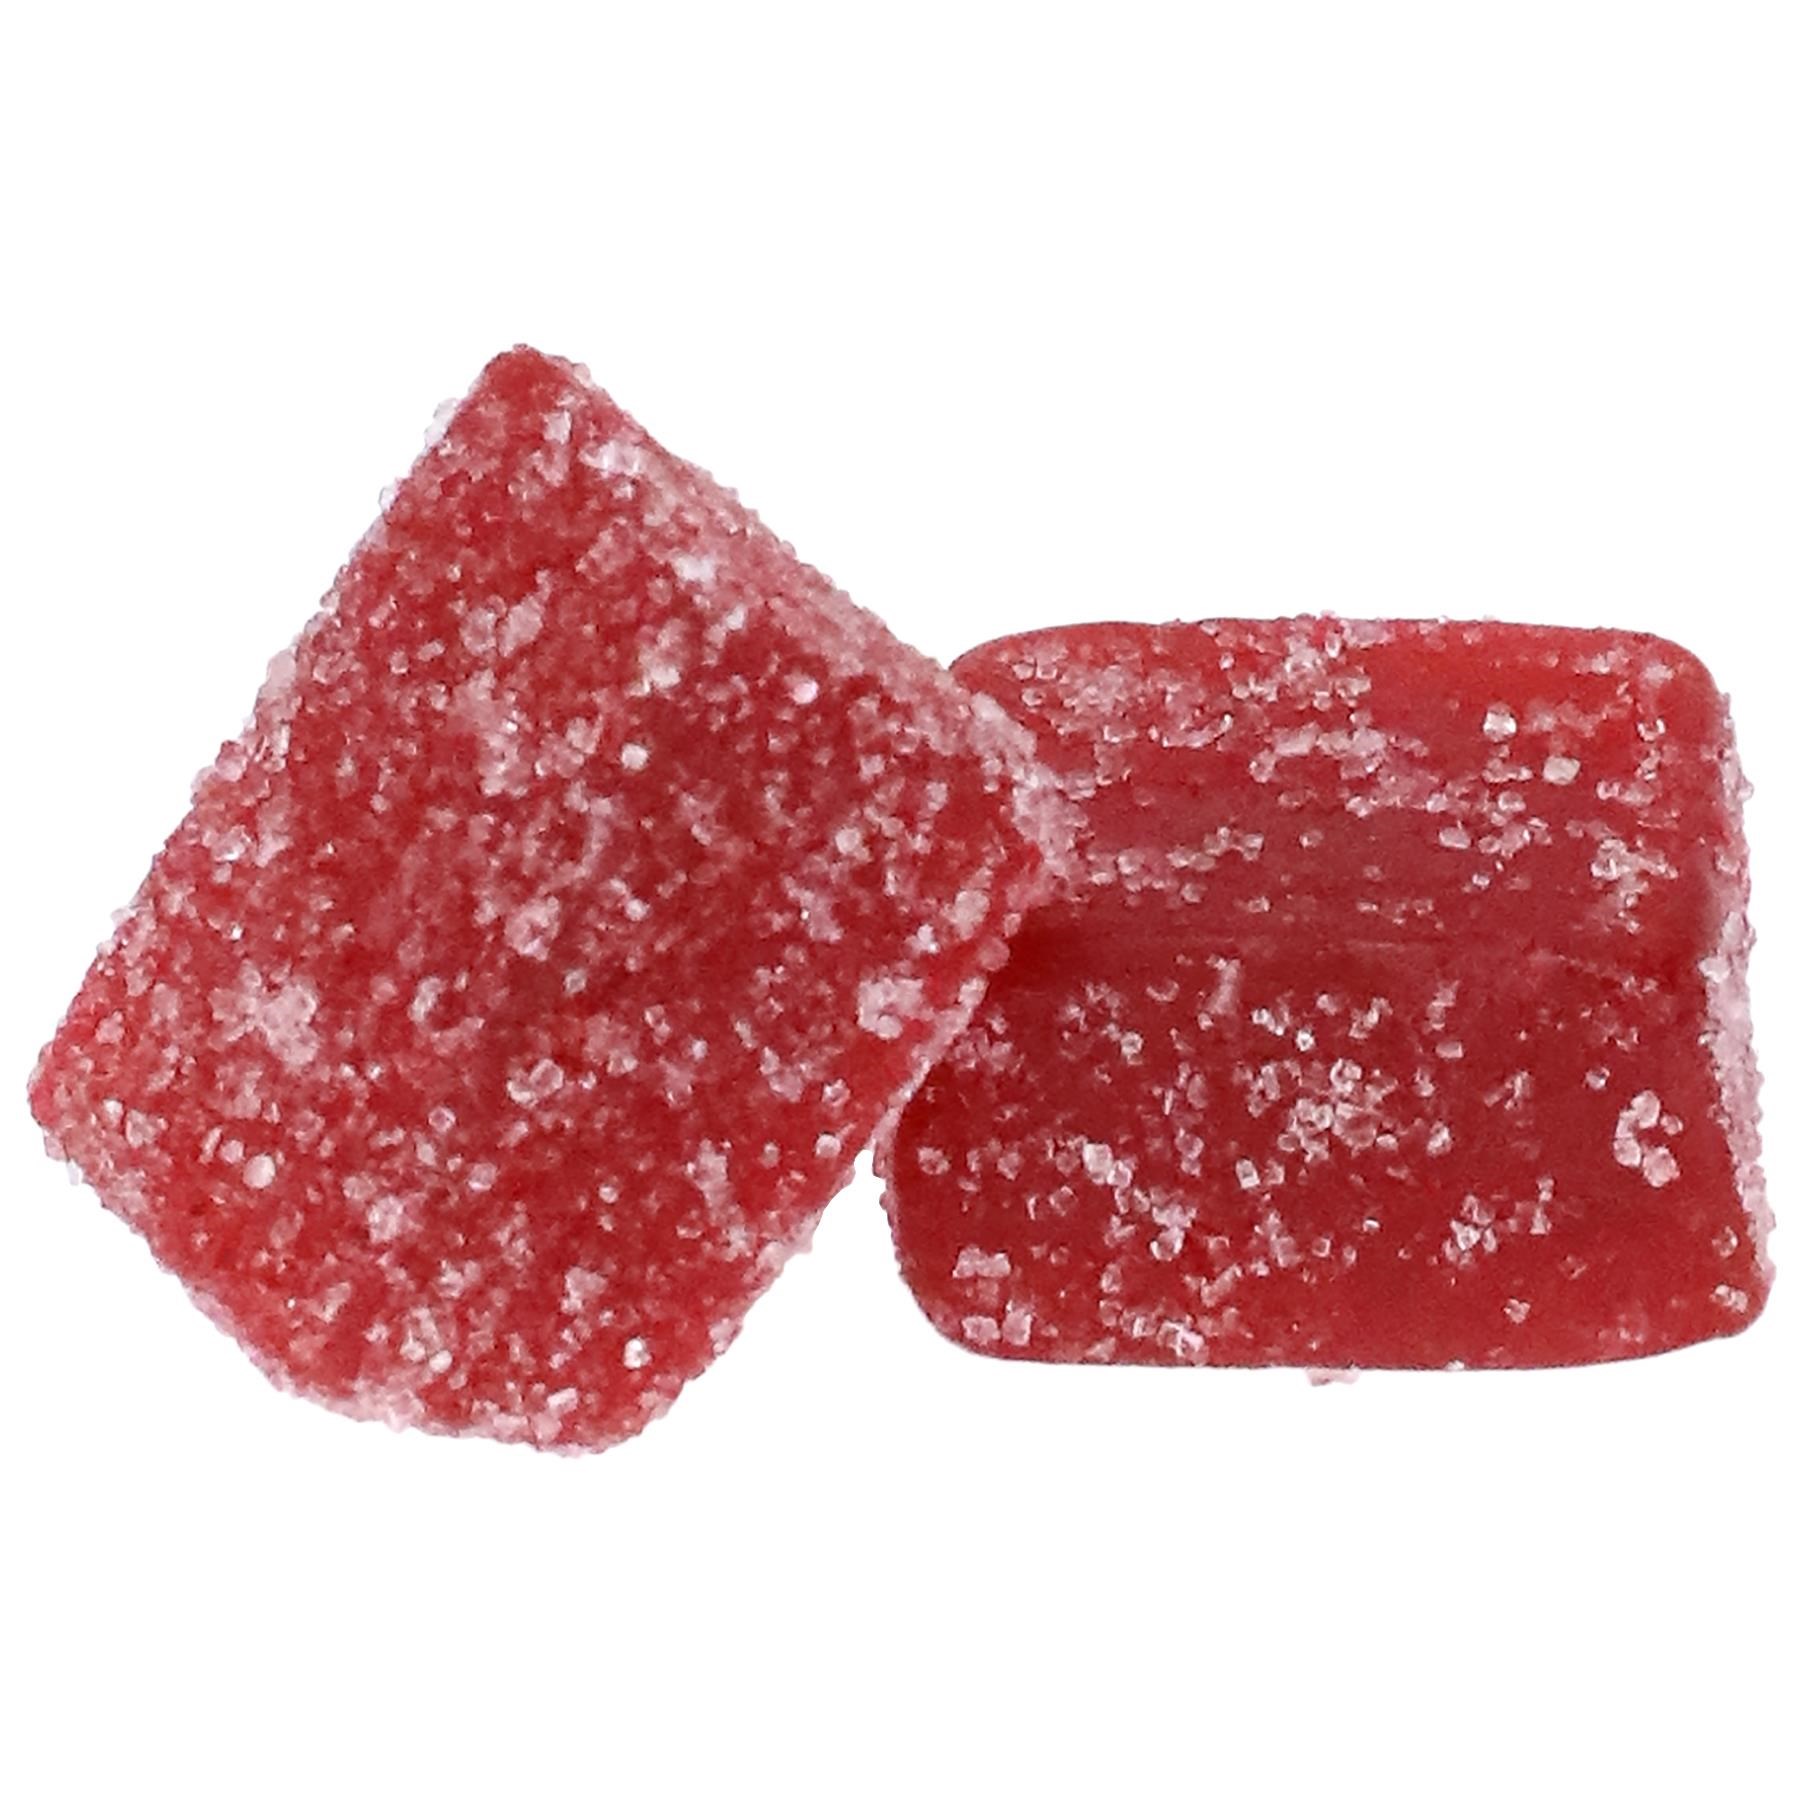 Spanish Fly Sex Gummies female actual product